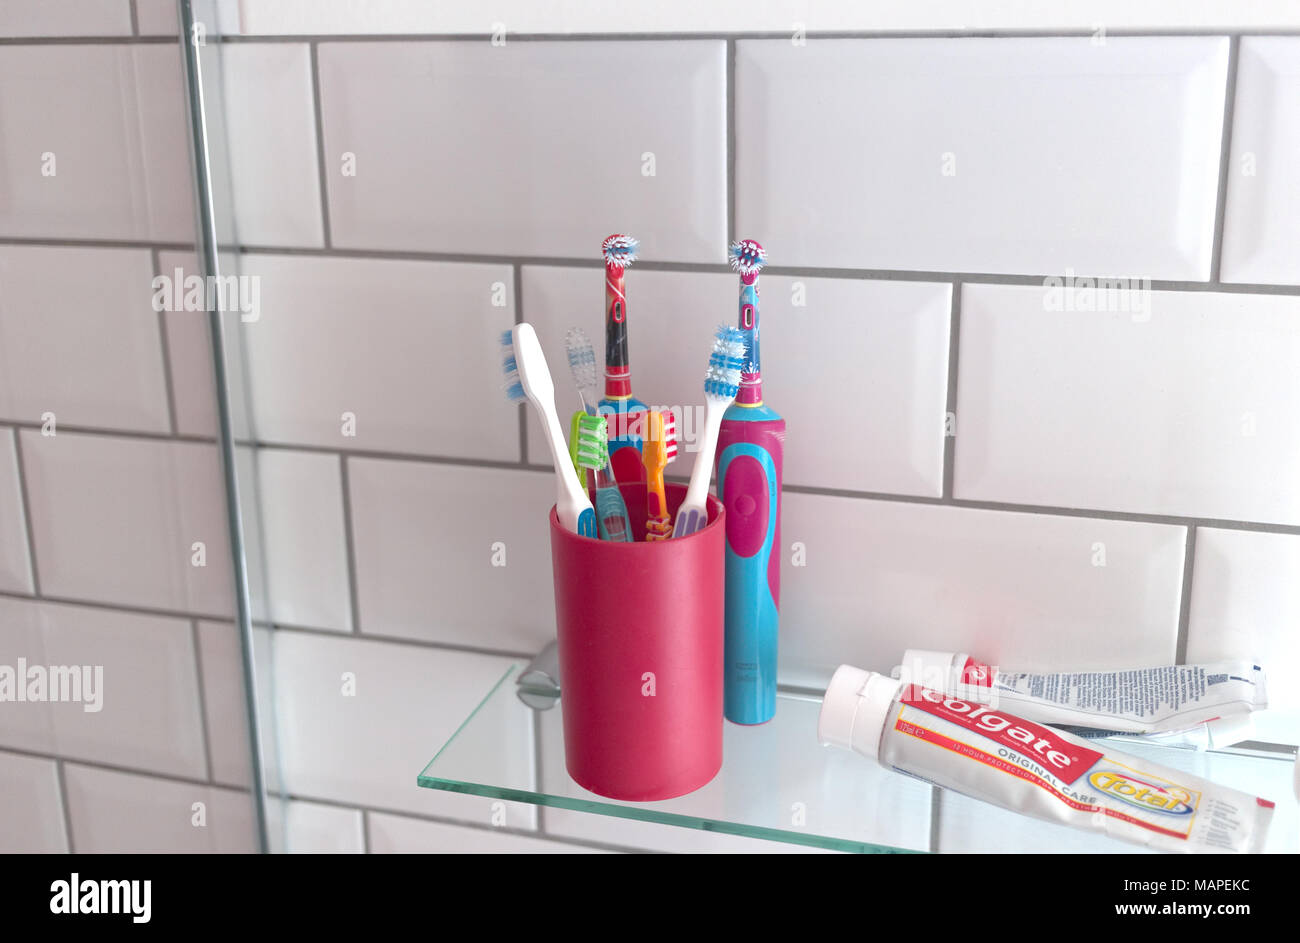 A variety of toothbrushes, including electric toothbrushes in a bathroom setting Stock Photo